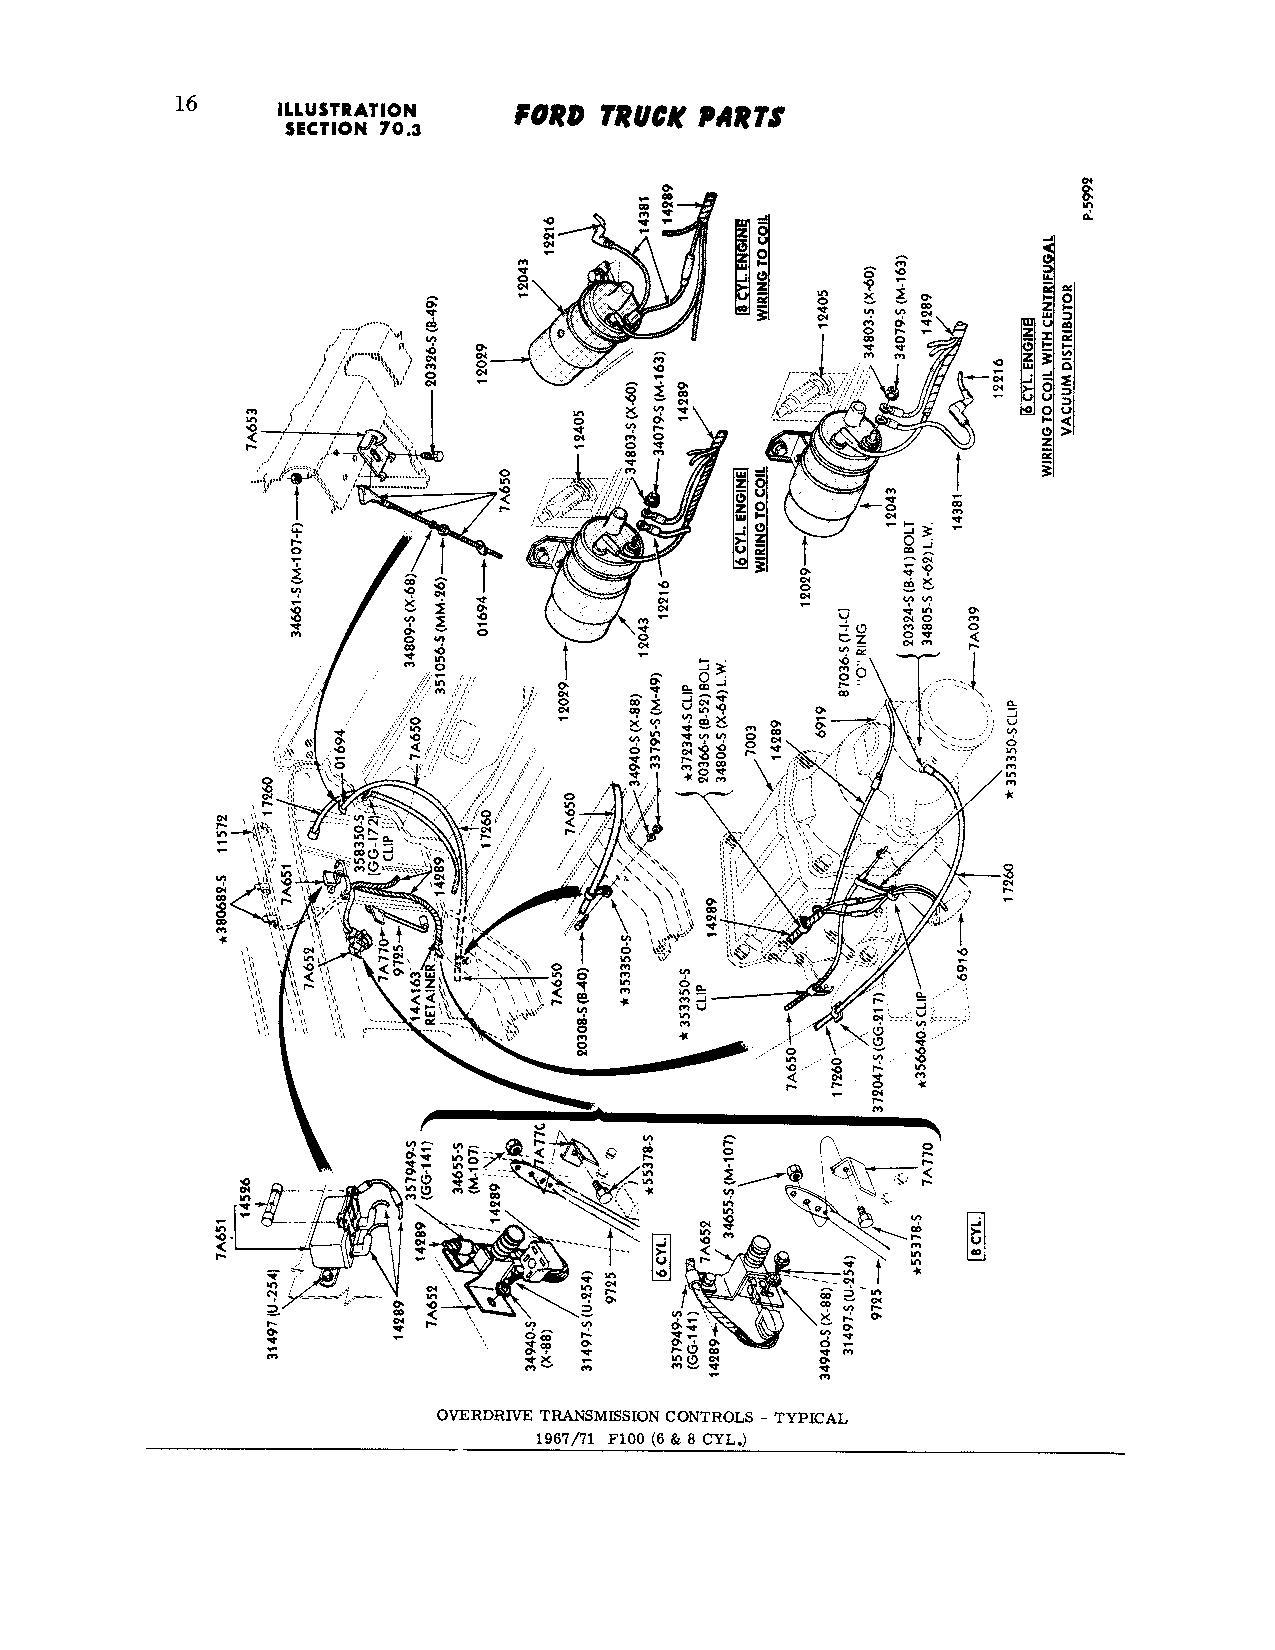 Wiring diagram for 1969 f100 ranger 390 three on the tree with